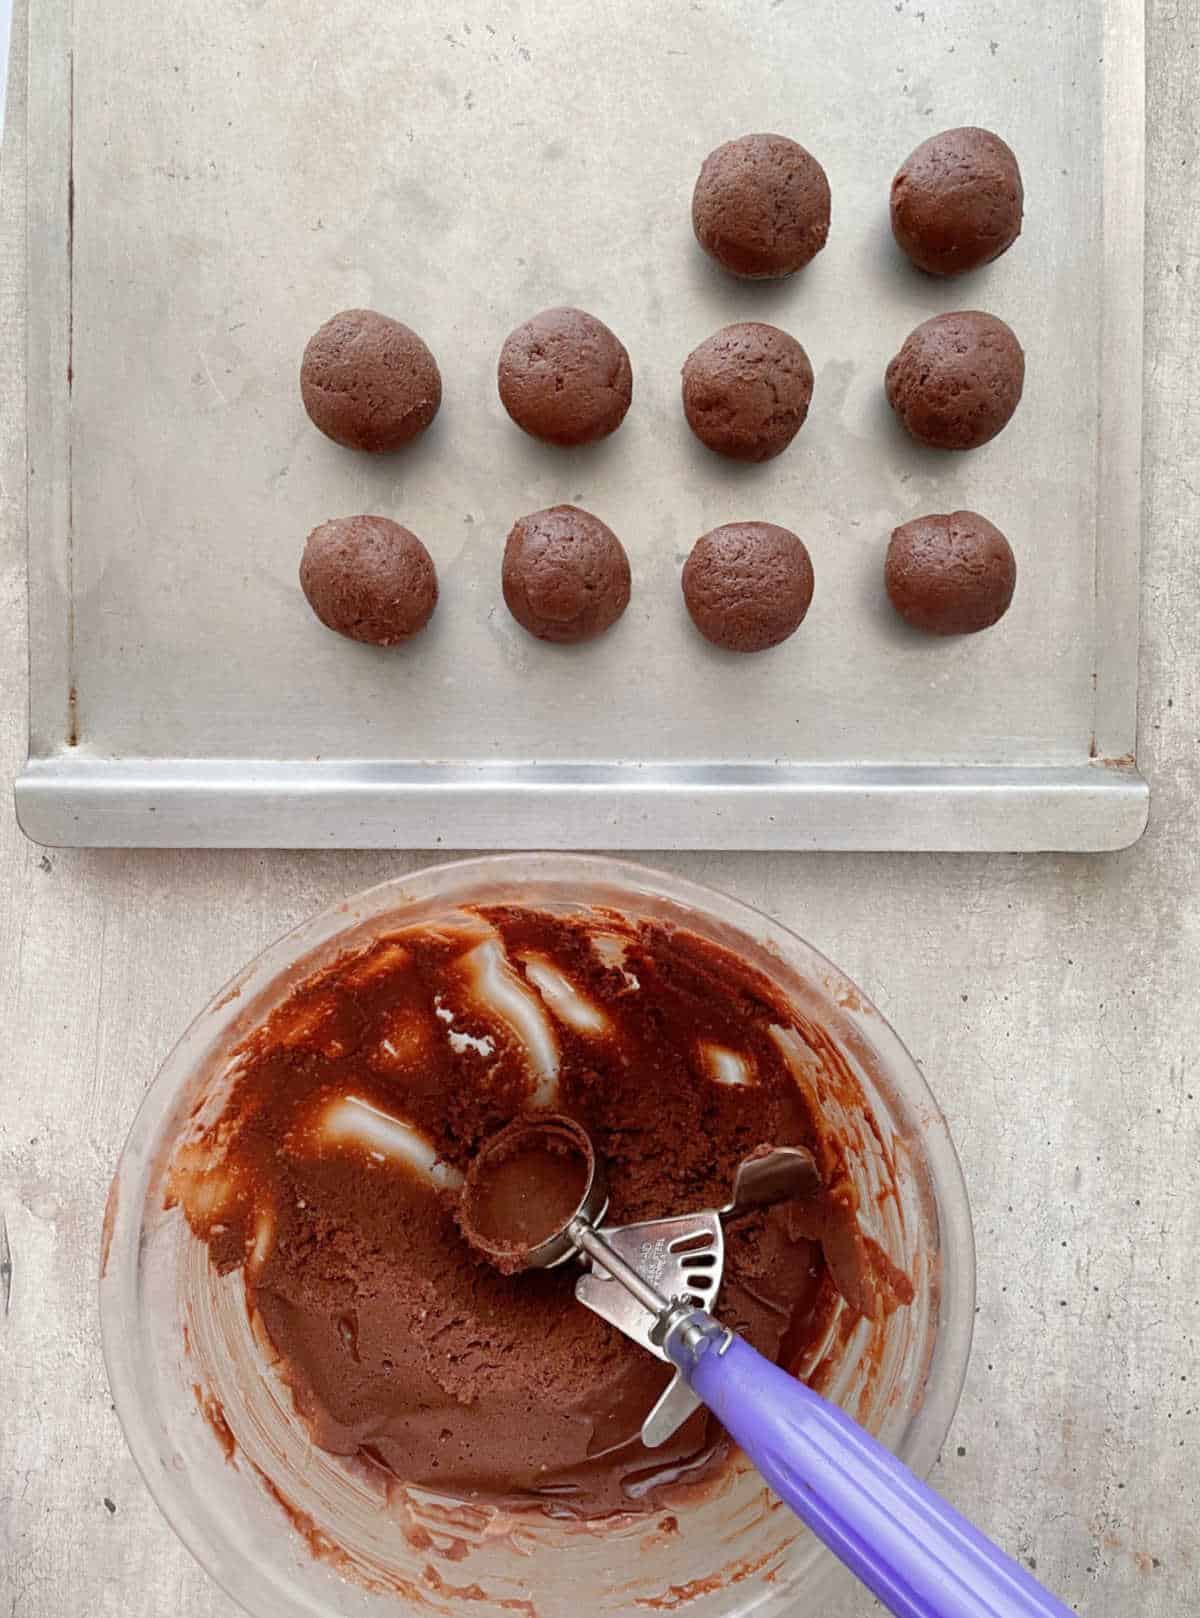 Baking sheet with chocolate cookie dough rounds. Glass bowl with dough and scoop. Grey surface.